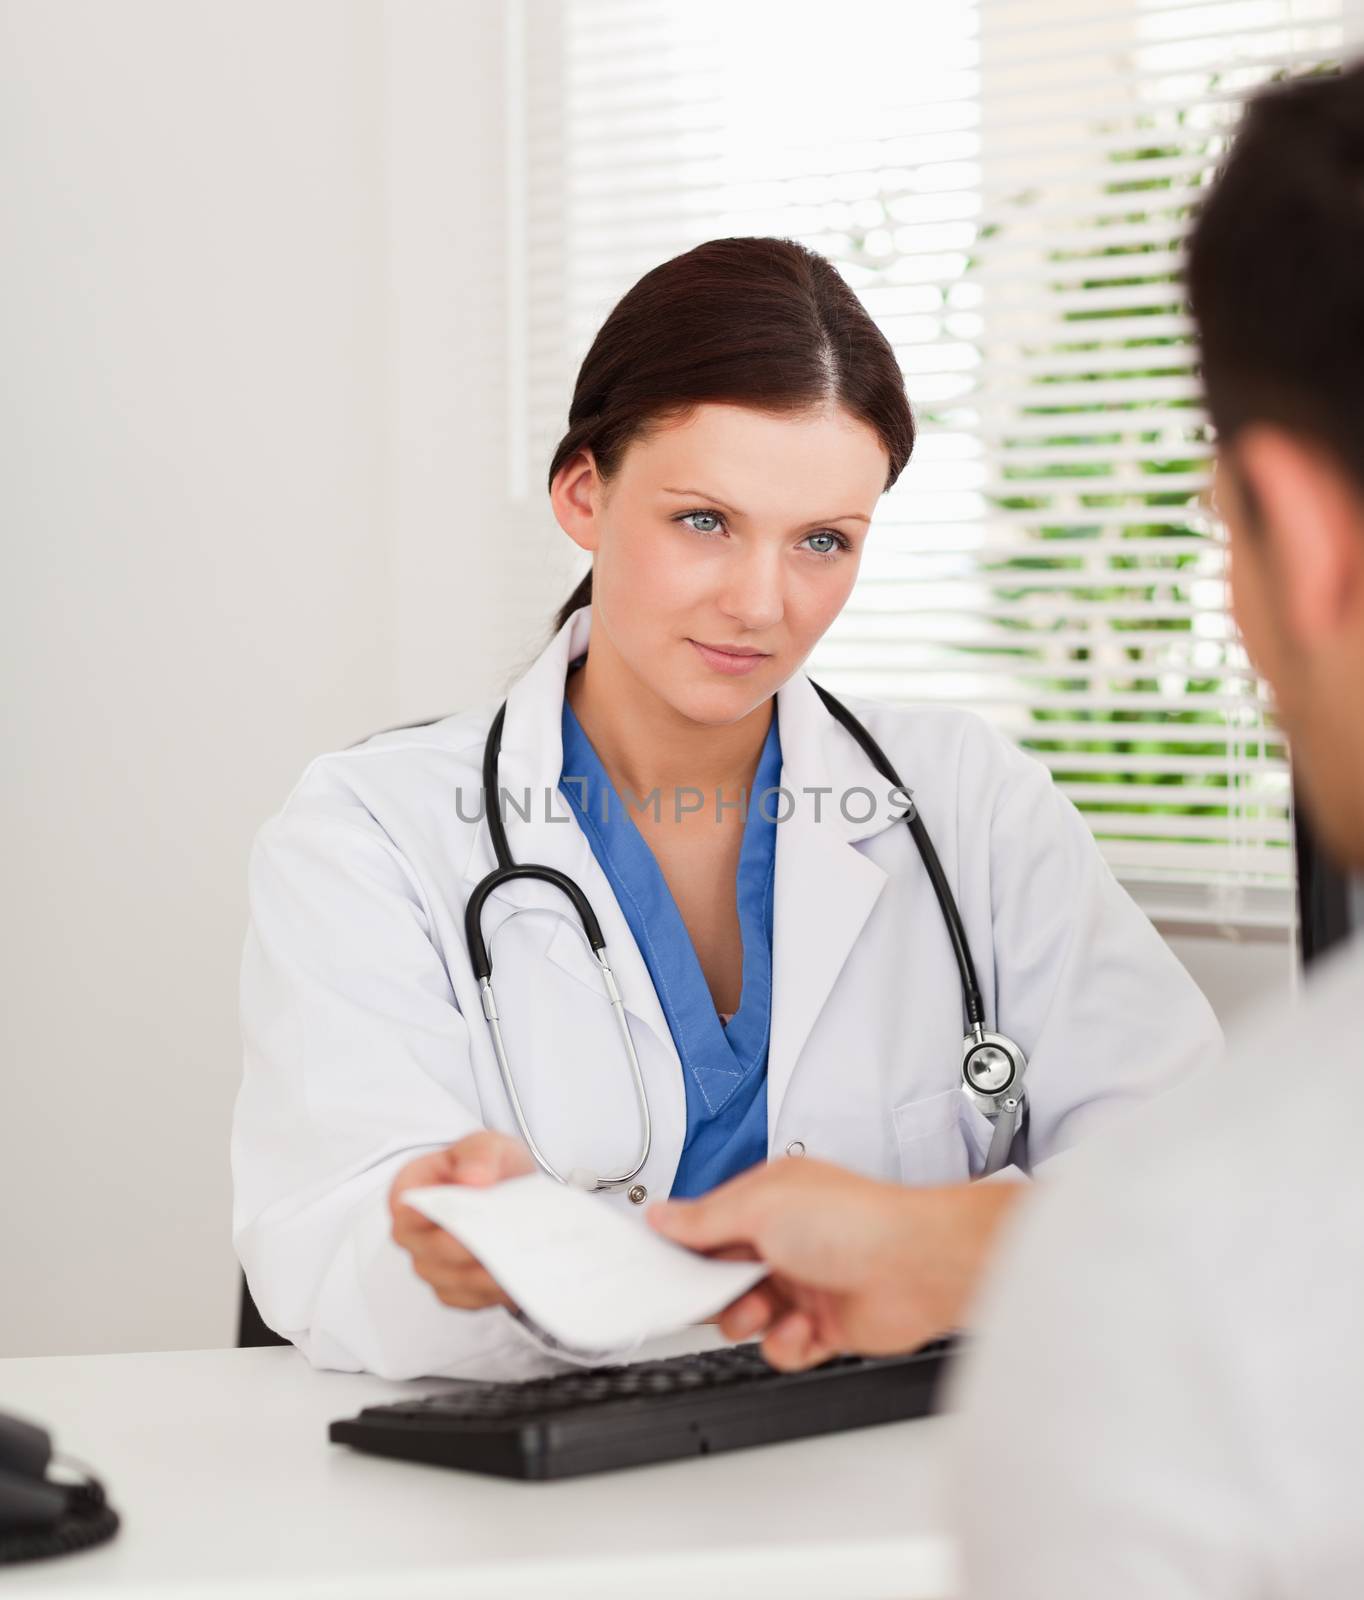 A female doctor is presenting a prescription to a patient in office